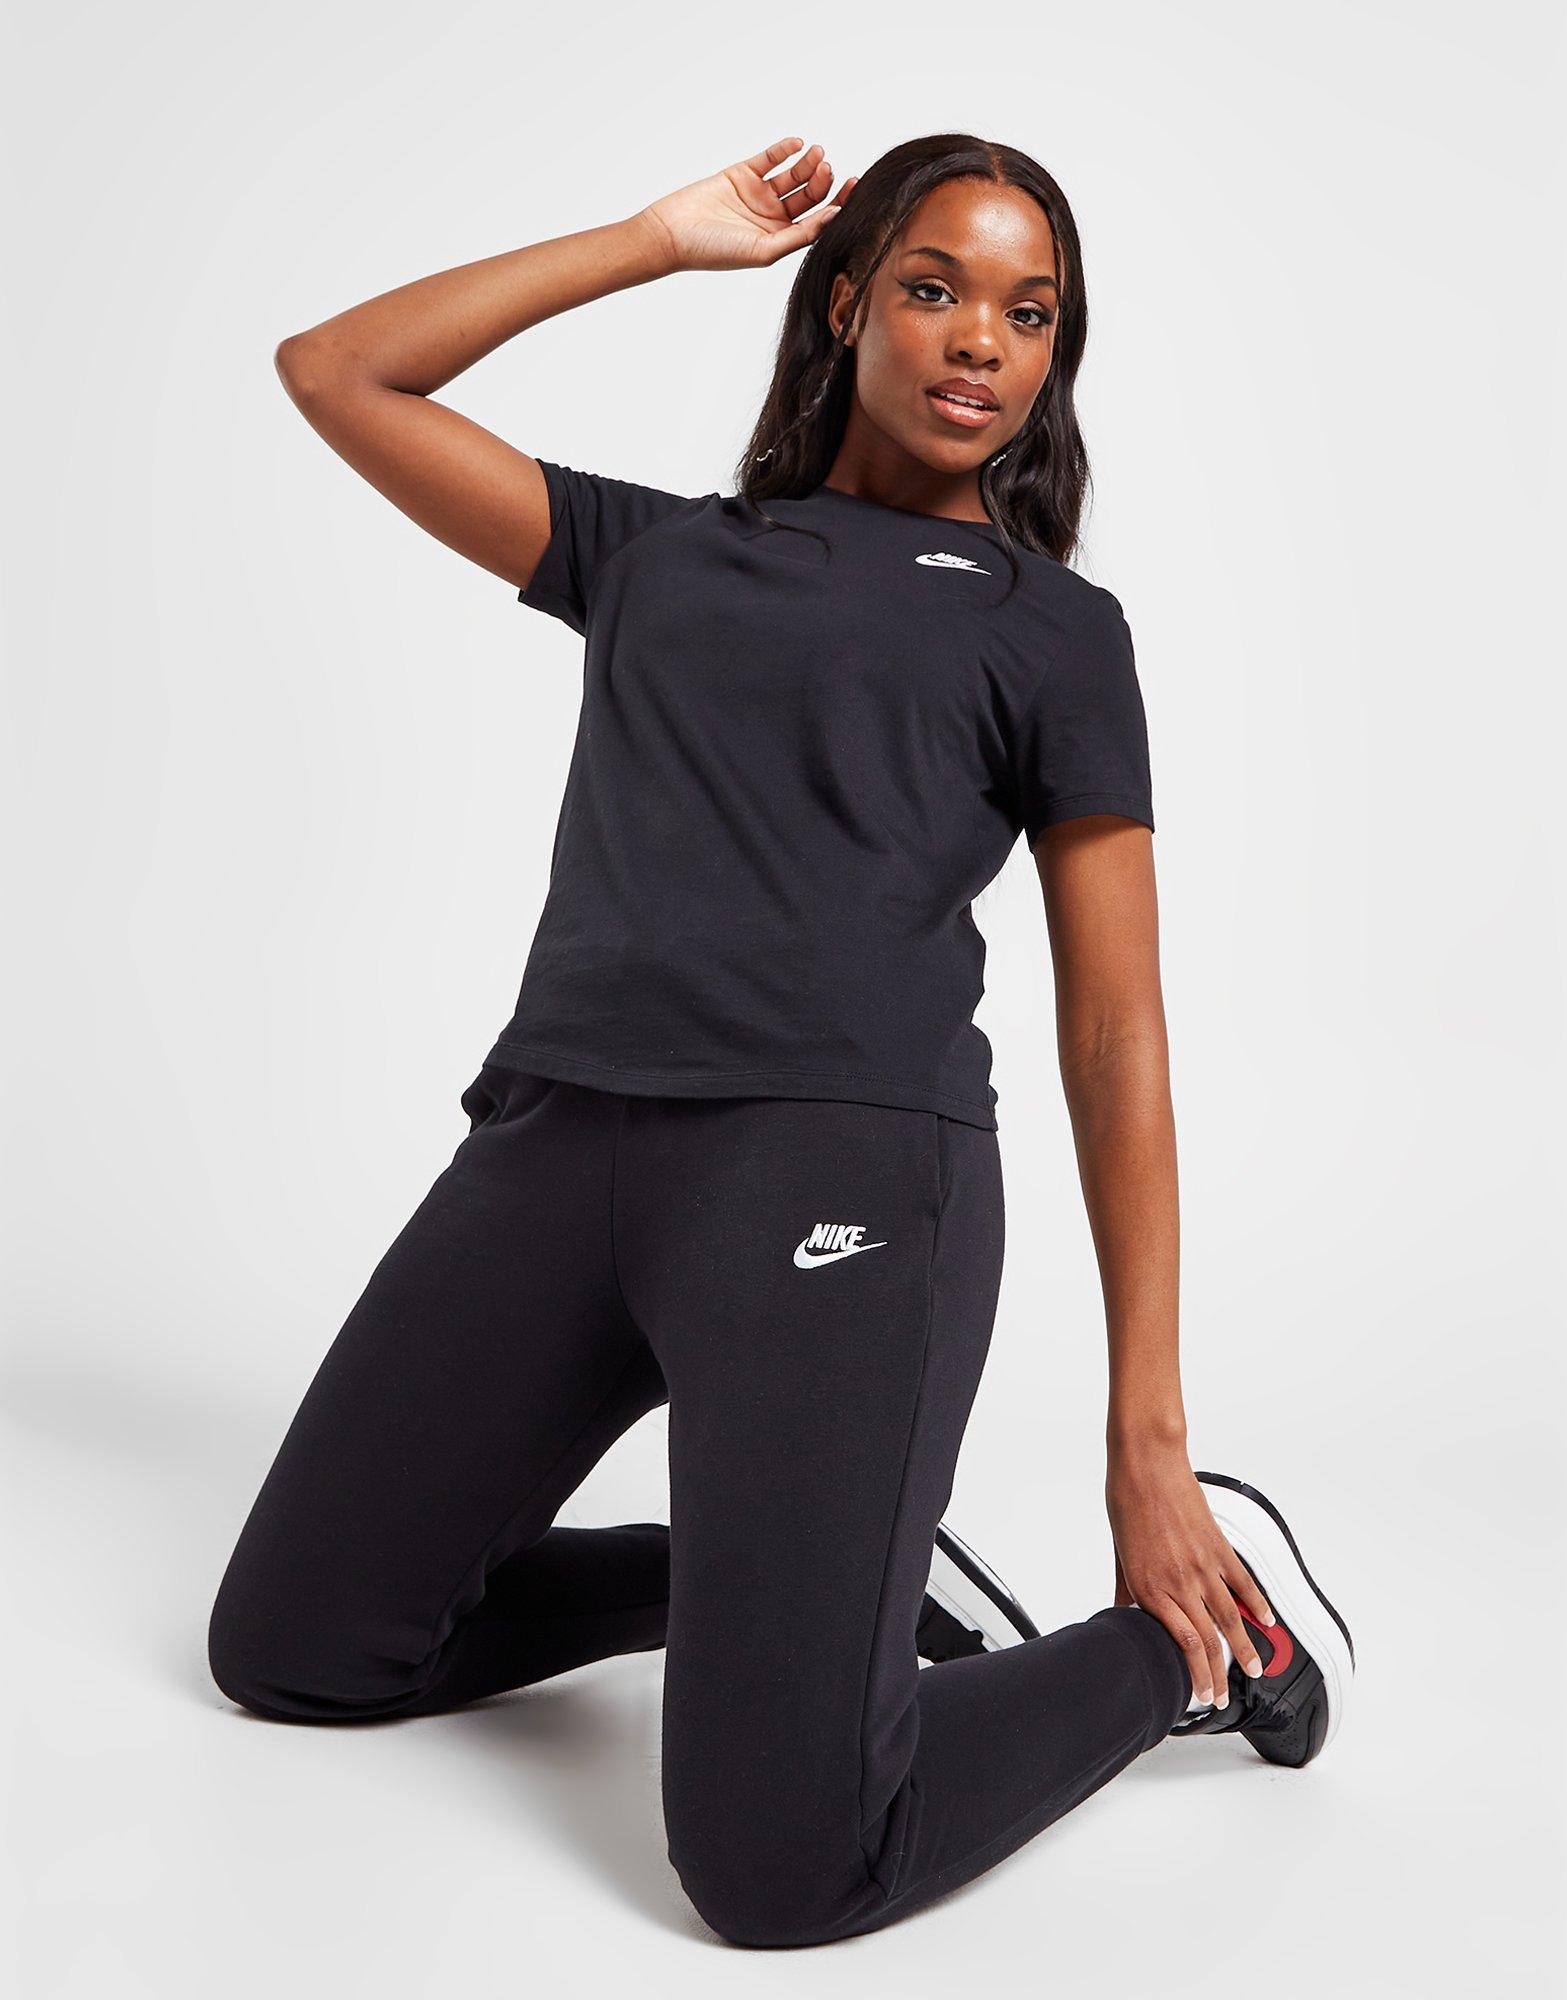 Nike Gray Essentials Sweatpants  Outfits with leggings, Shoes to